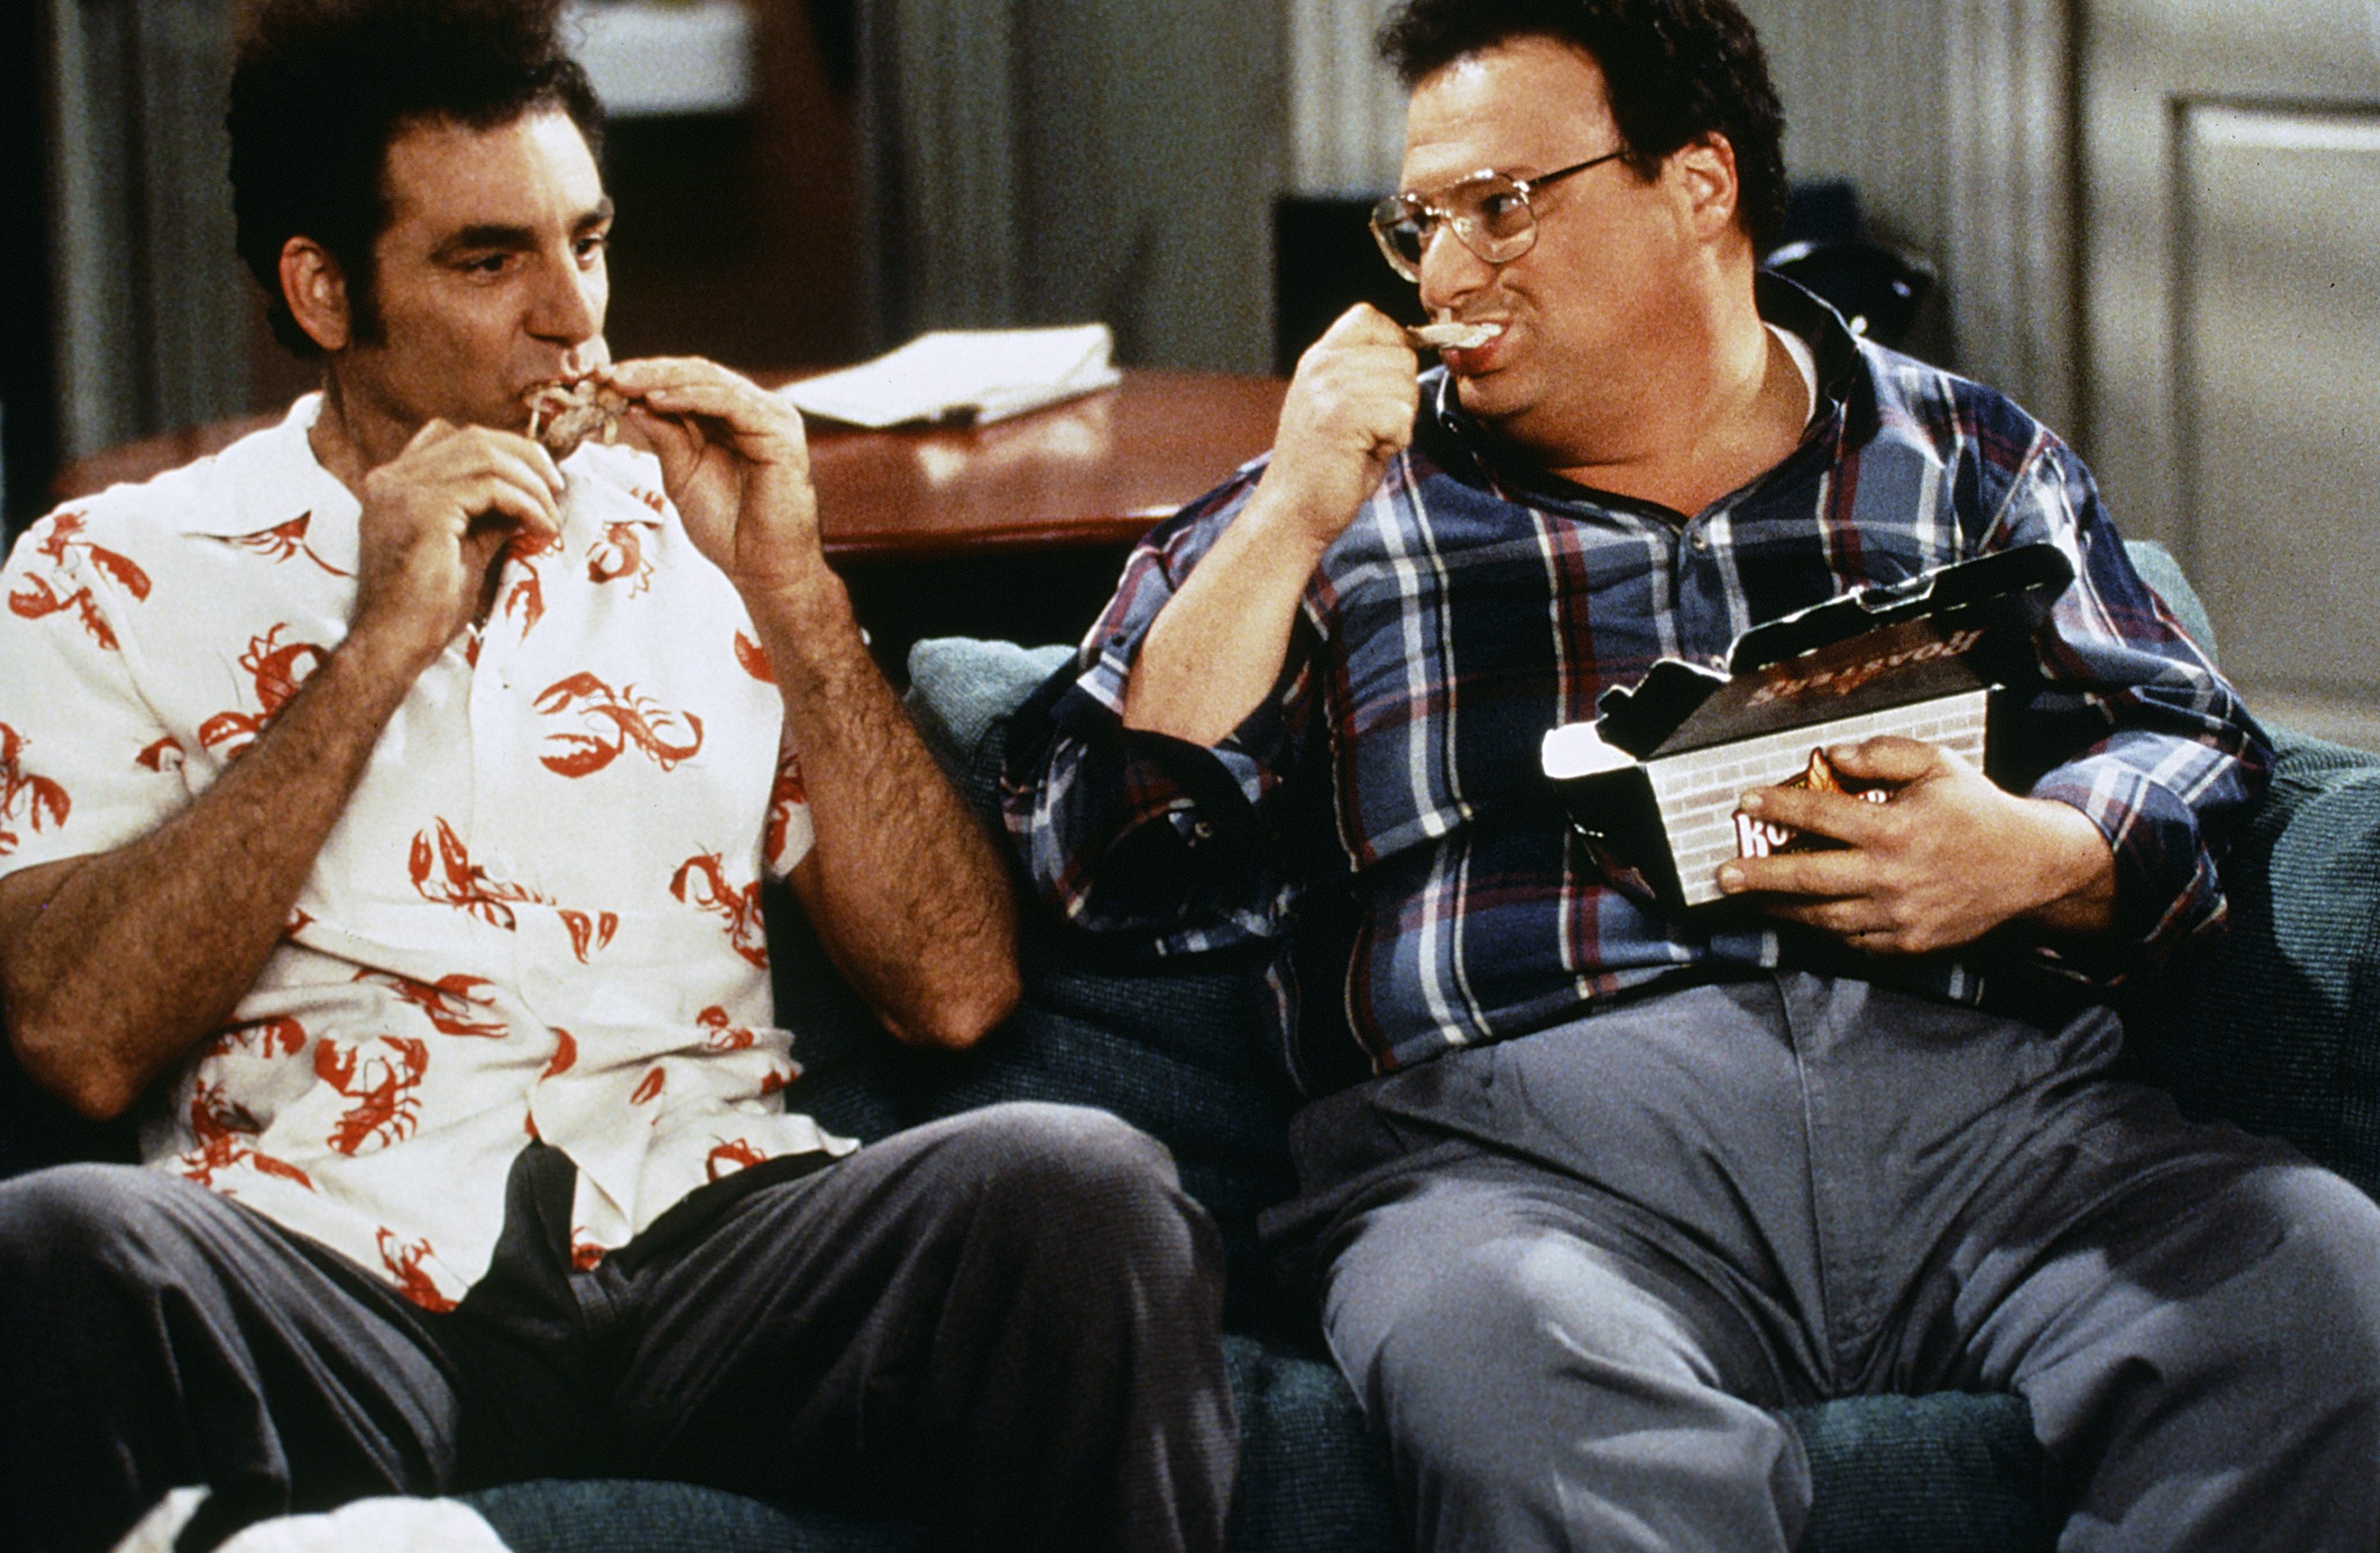 Michael Richards as Cosmo Kramer, Wayne Knight as Newman on the "Seinfeld" sitcom November 14, 1996. | Source: Getty Images